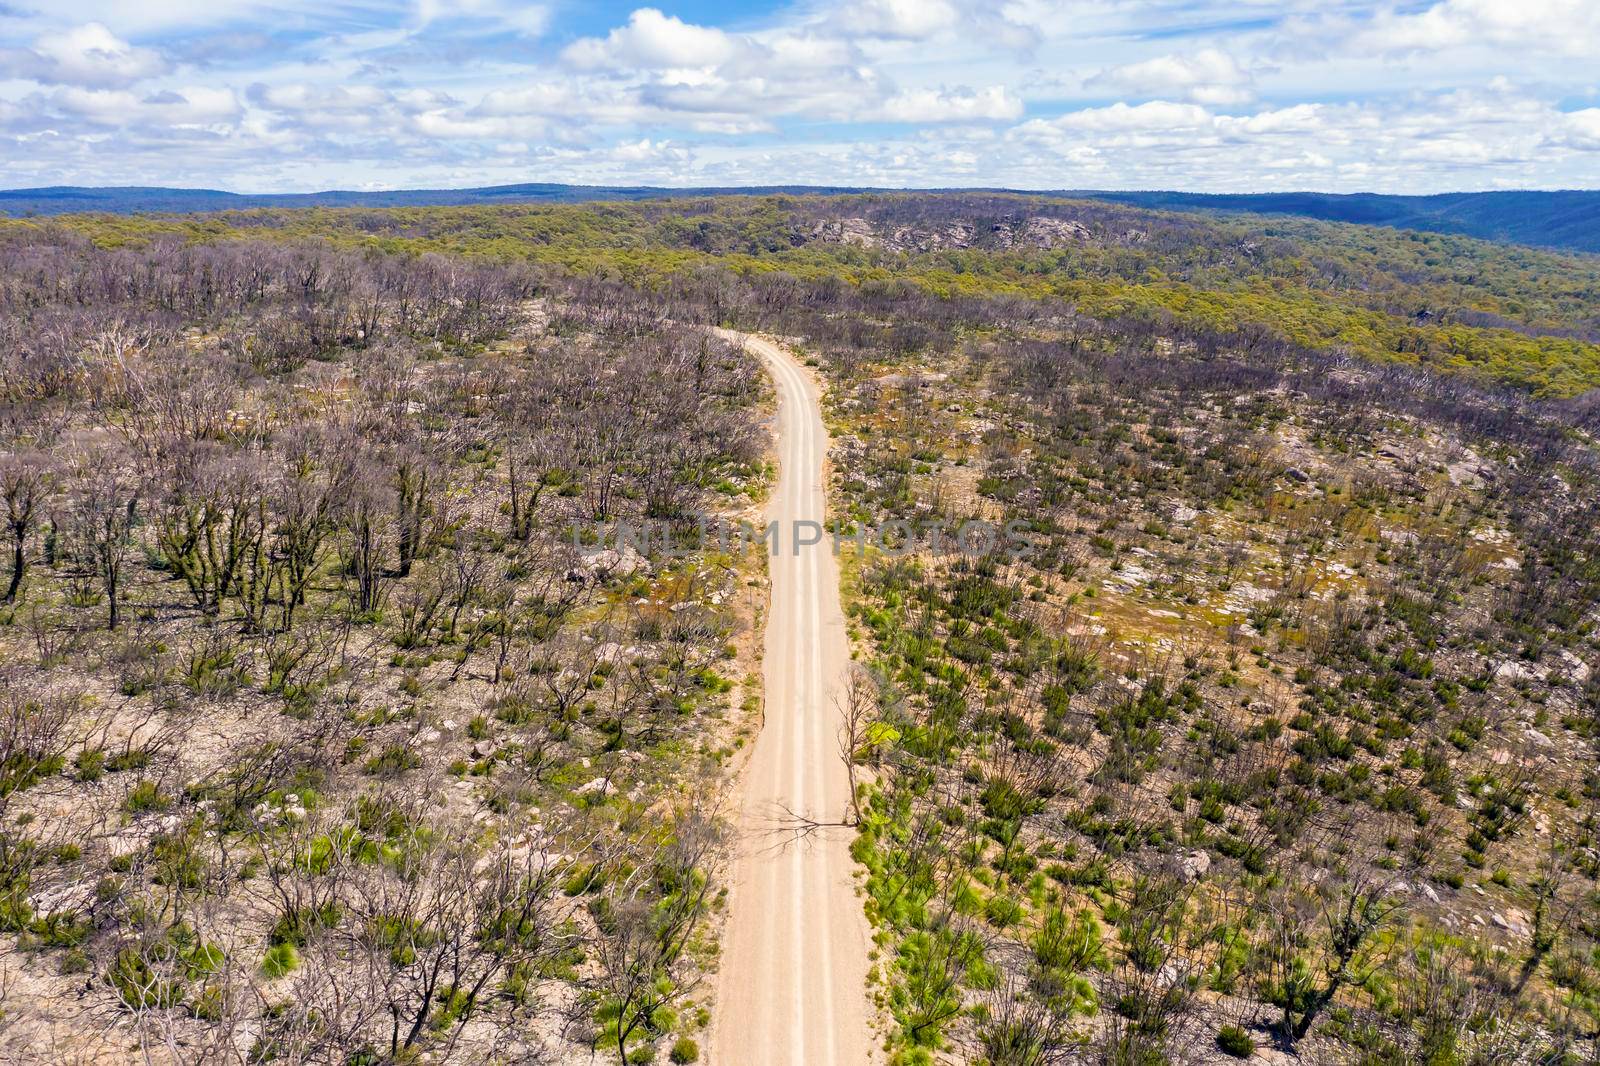 Aerial view of a dirt road in a forest regenerating from bushfire in regional Australia by WittkePhotos